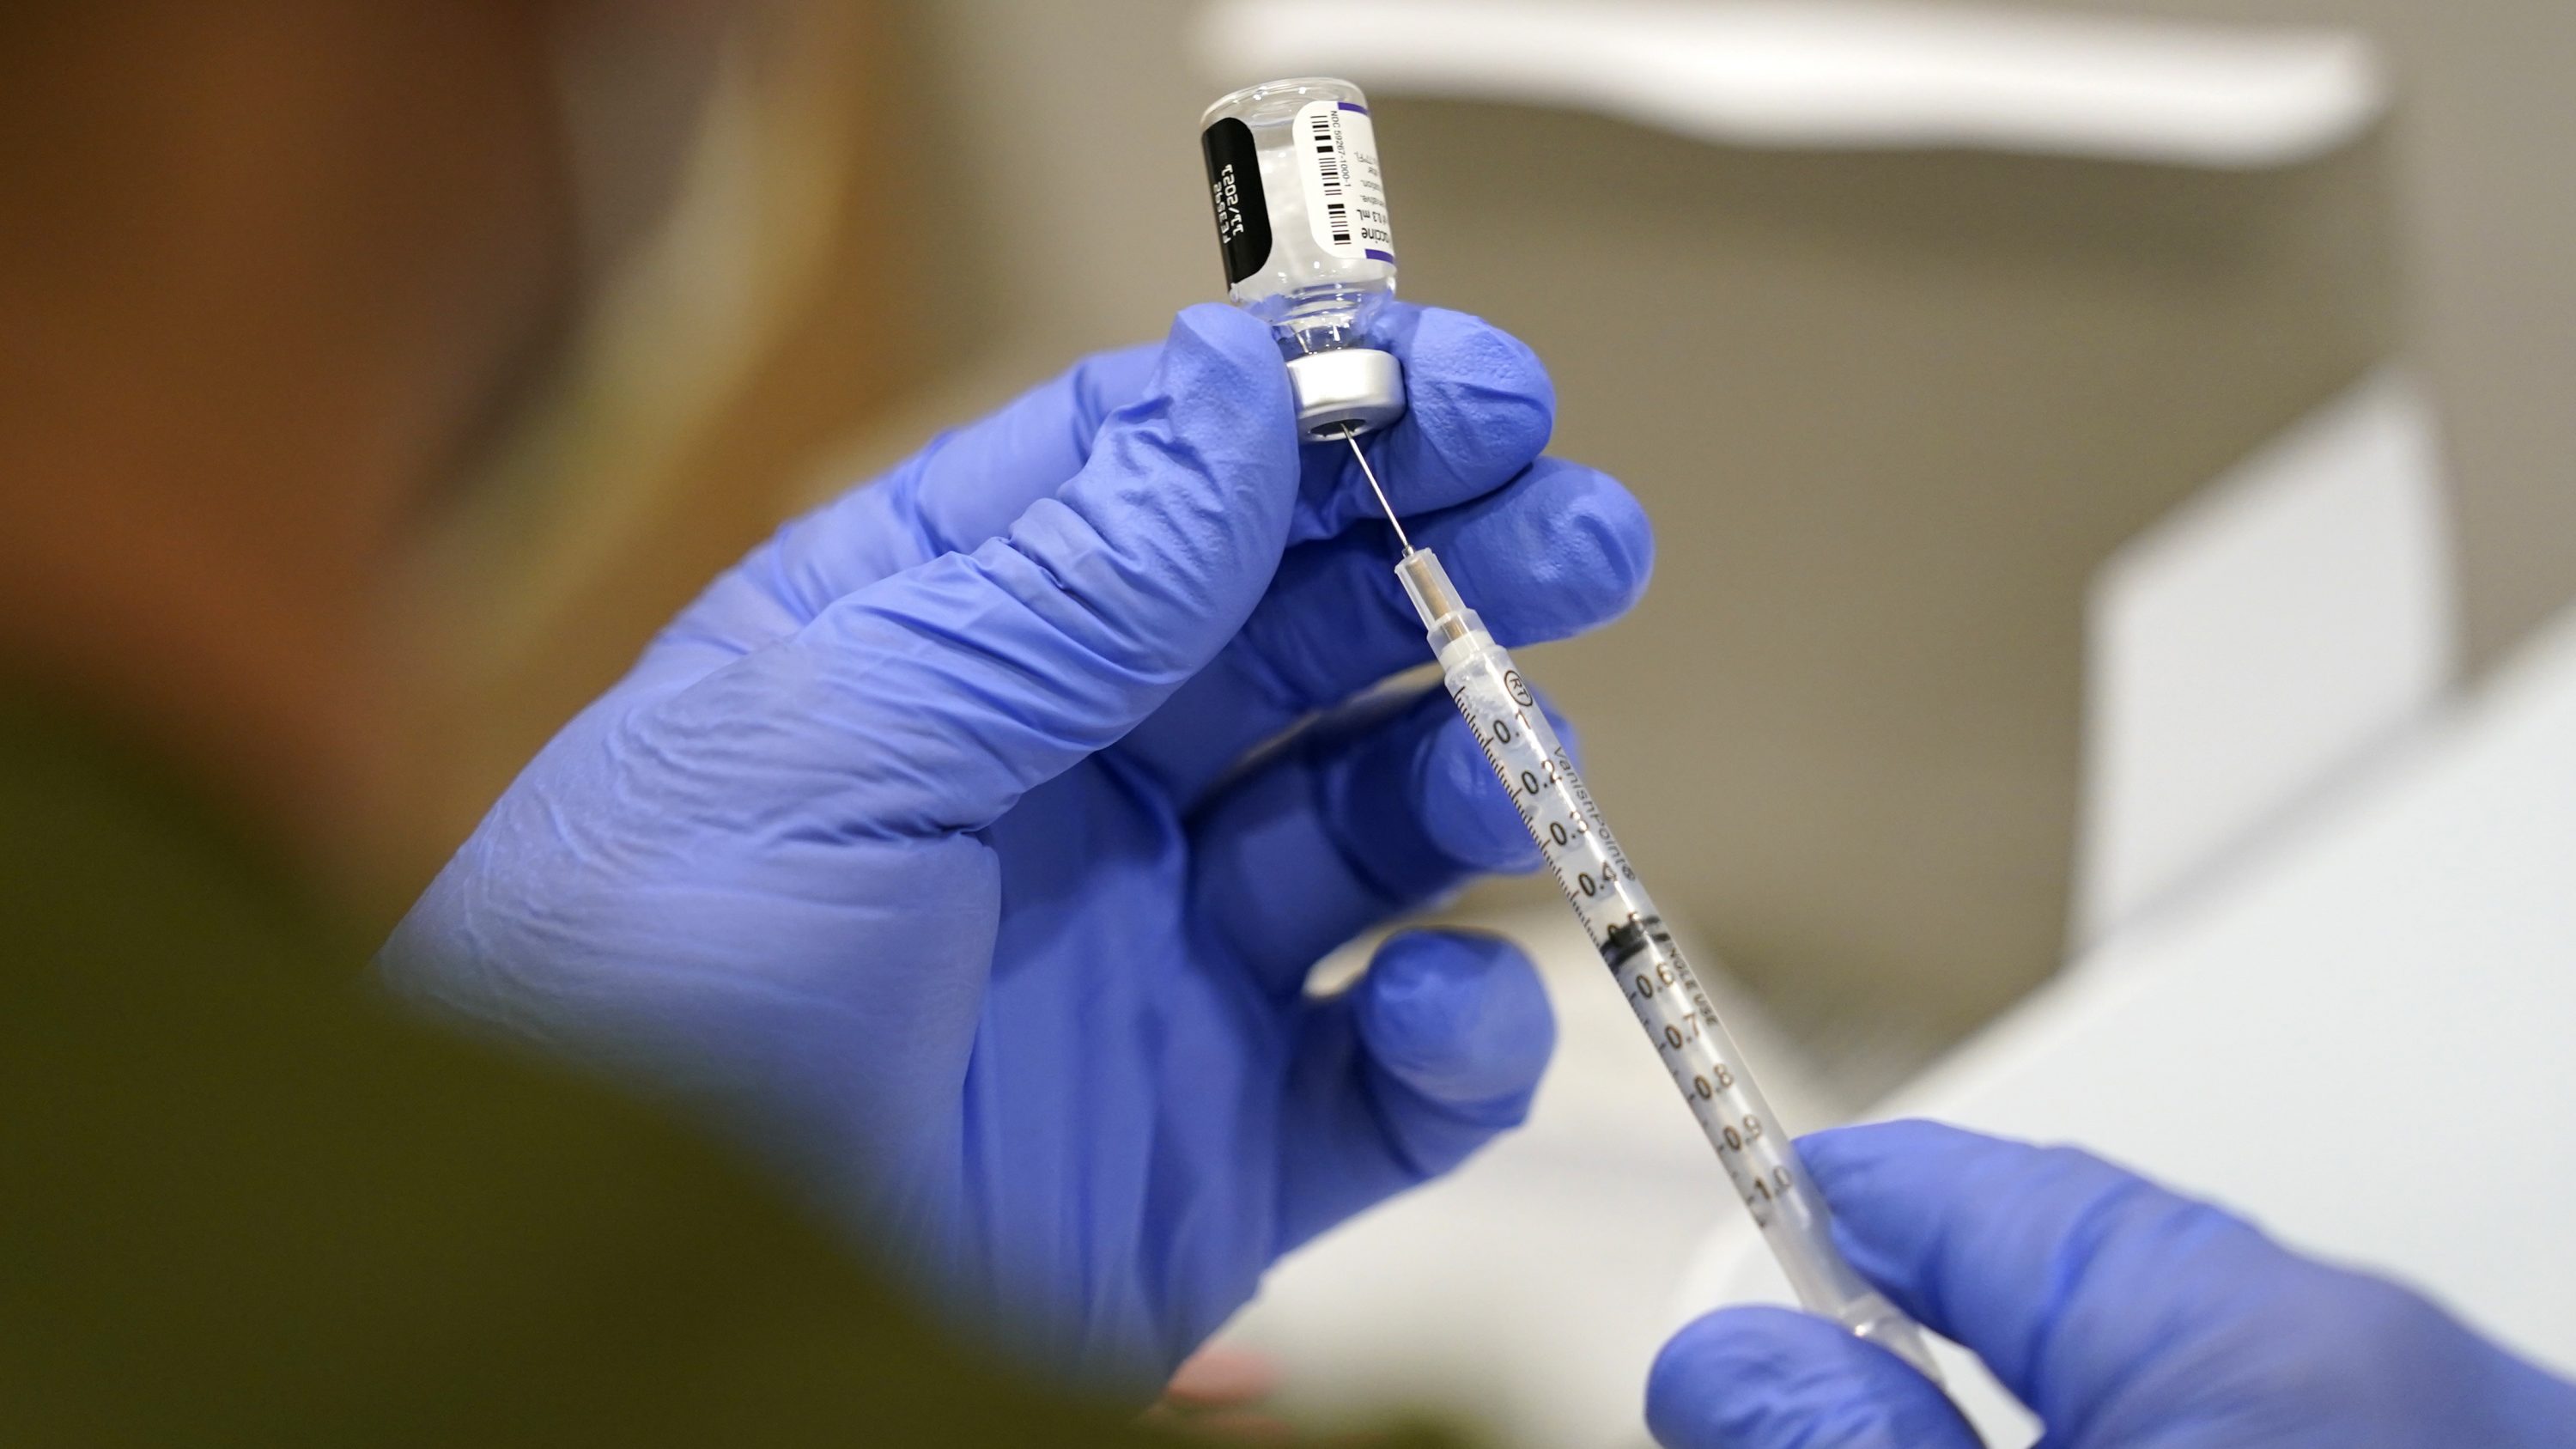 A health care worker fills a syringe with the Pfizer COVID-19 vaccine.